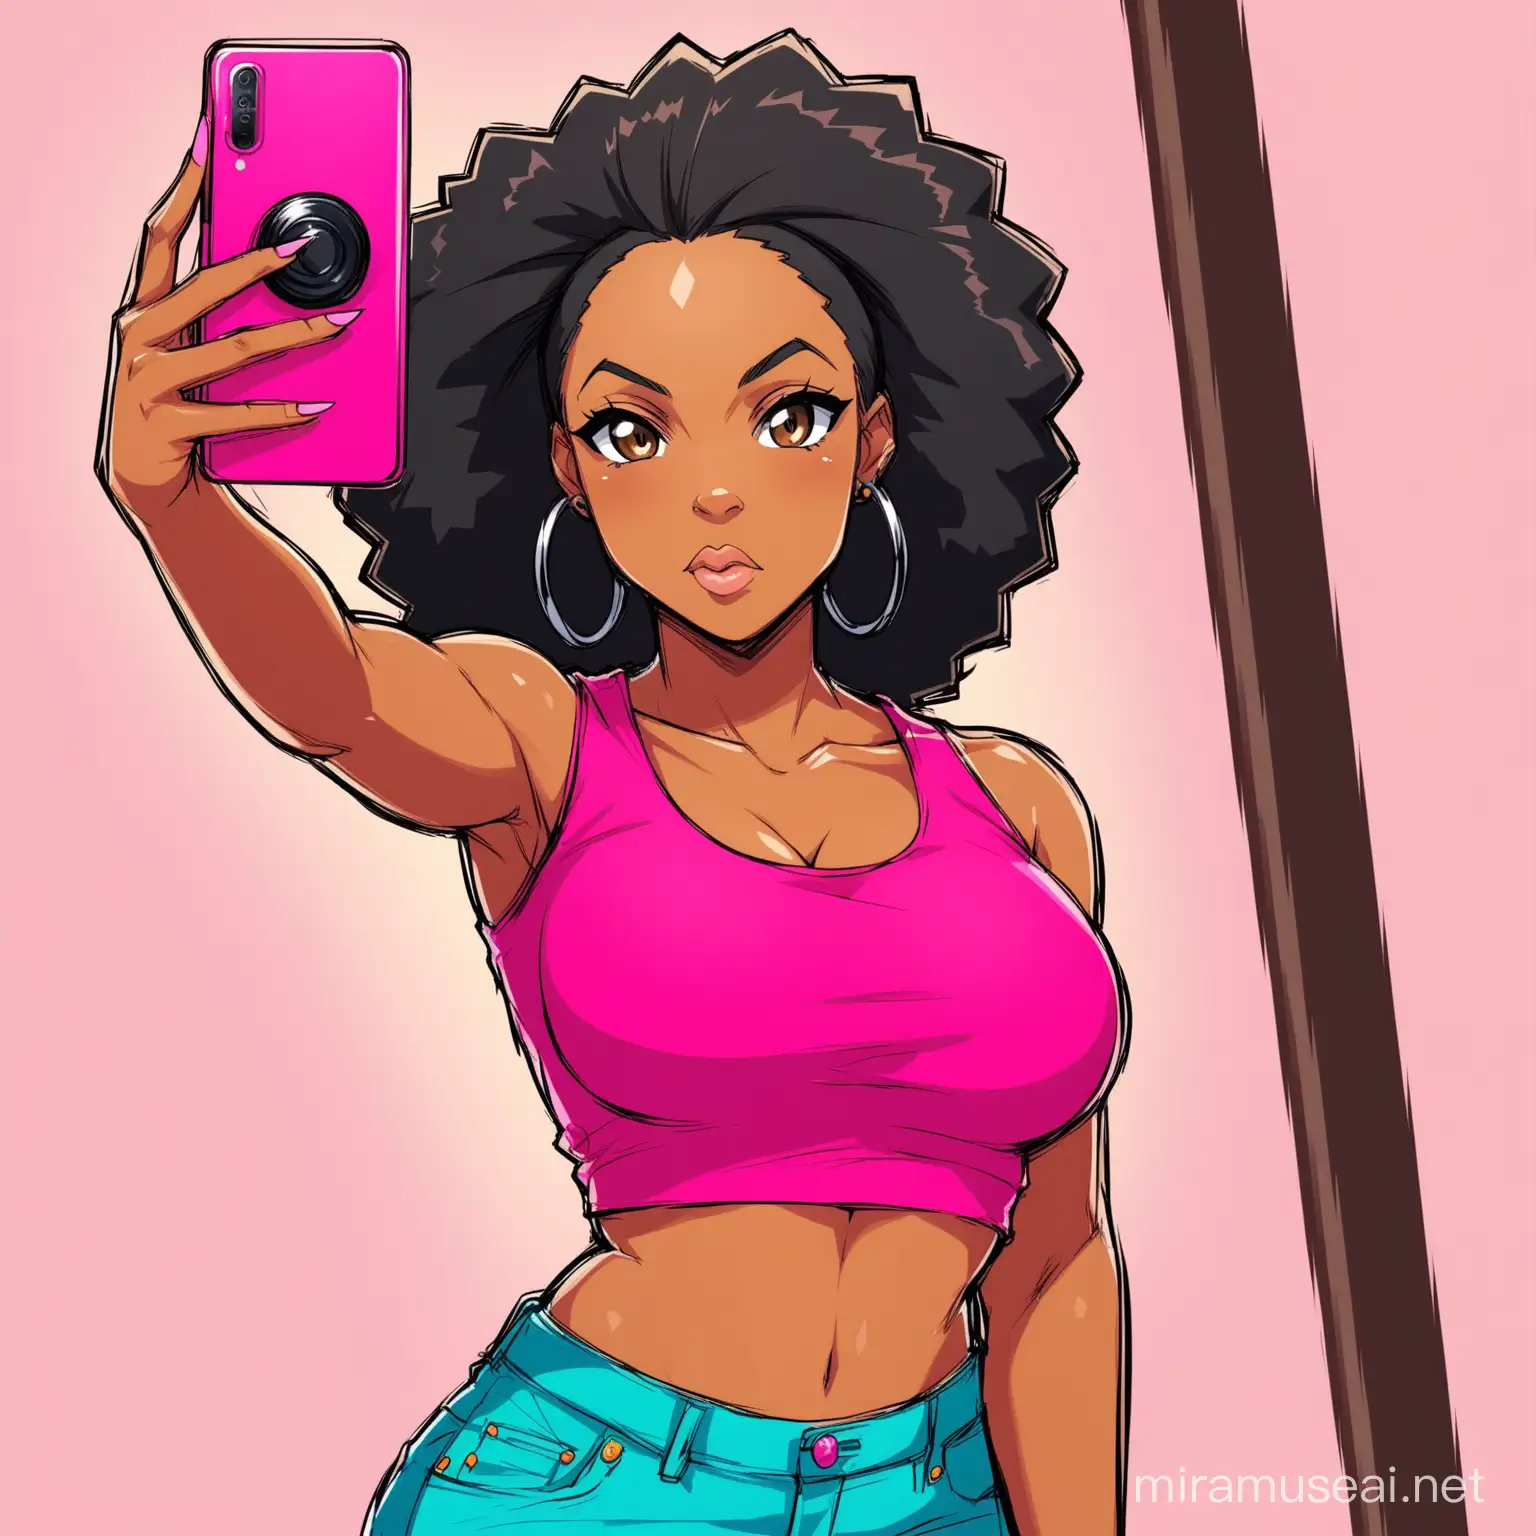 create the Boondocks cartoon styled character,  dark skin African American woman with long black hair, with hot pink crop top, selfie picture